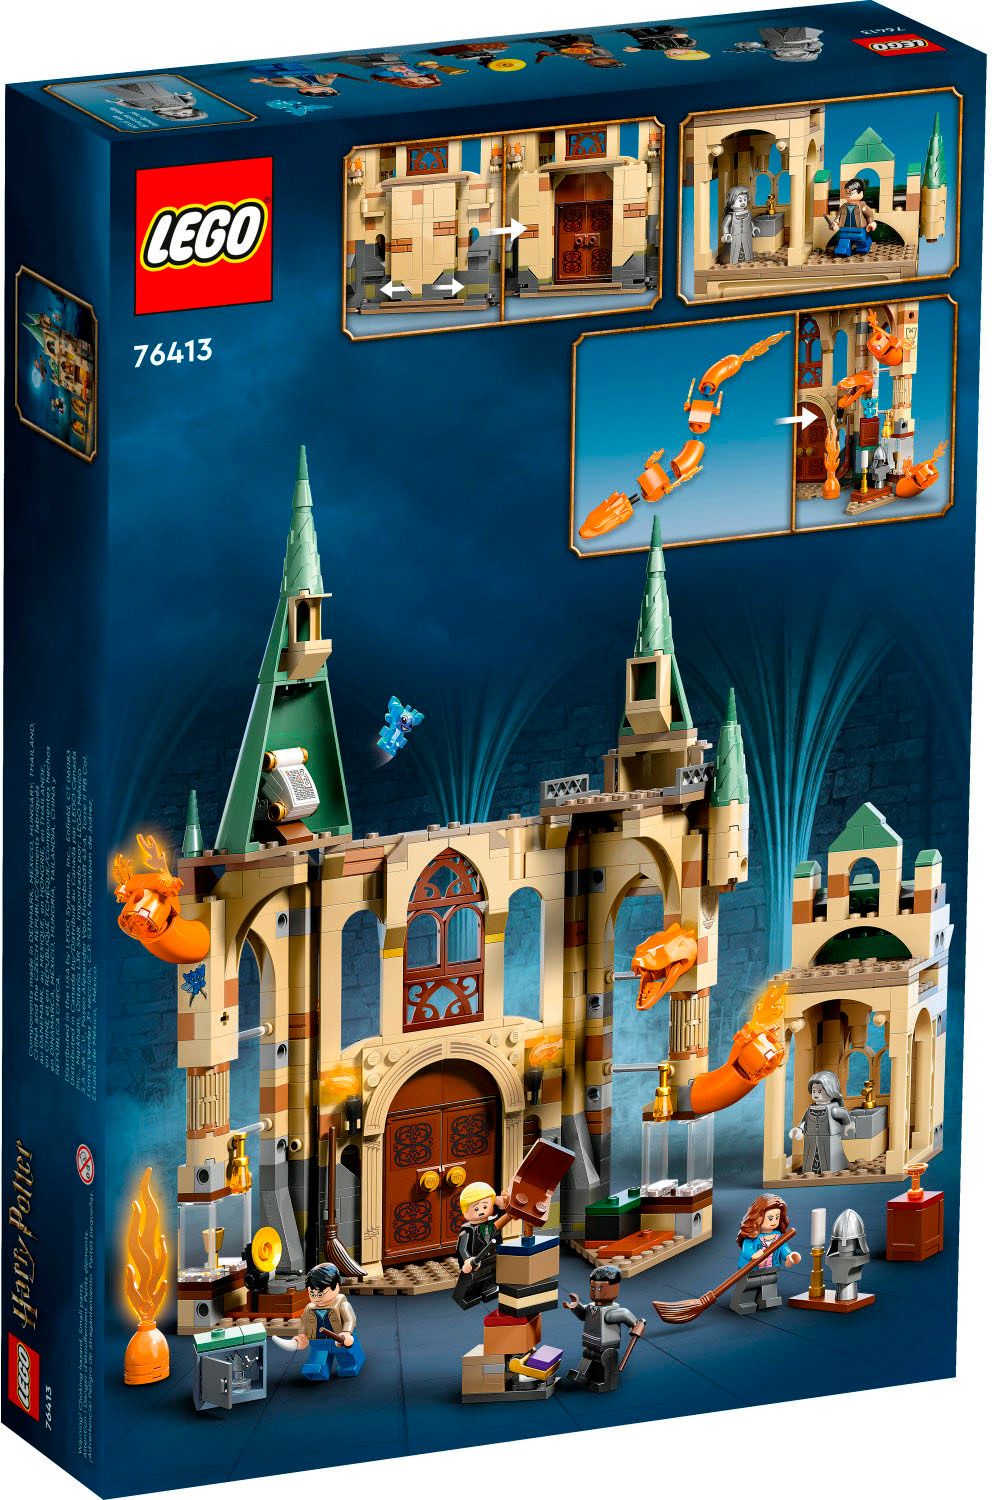 This LEGO Hogwarts could be the template for a rumoured set